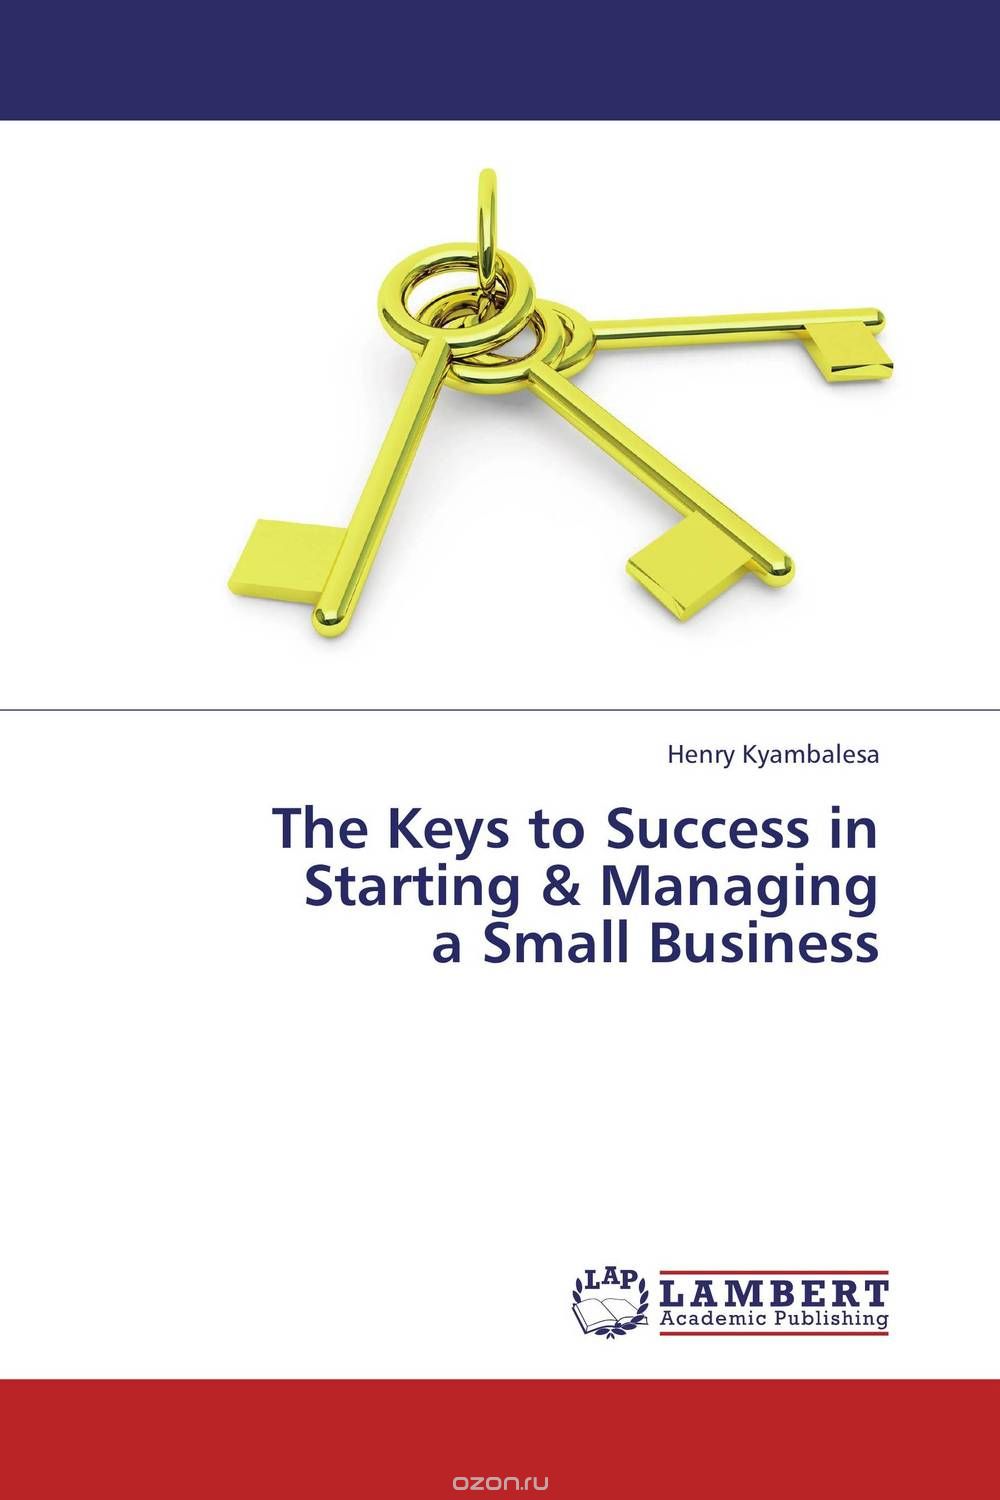 The Keys to Success in Starting & Managing  a Small Business